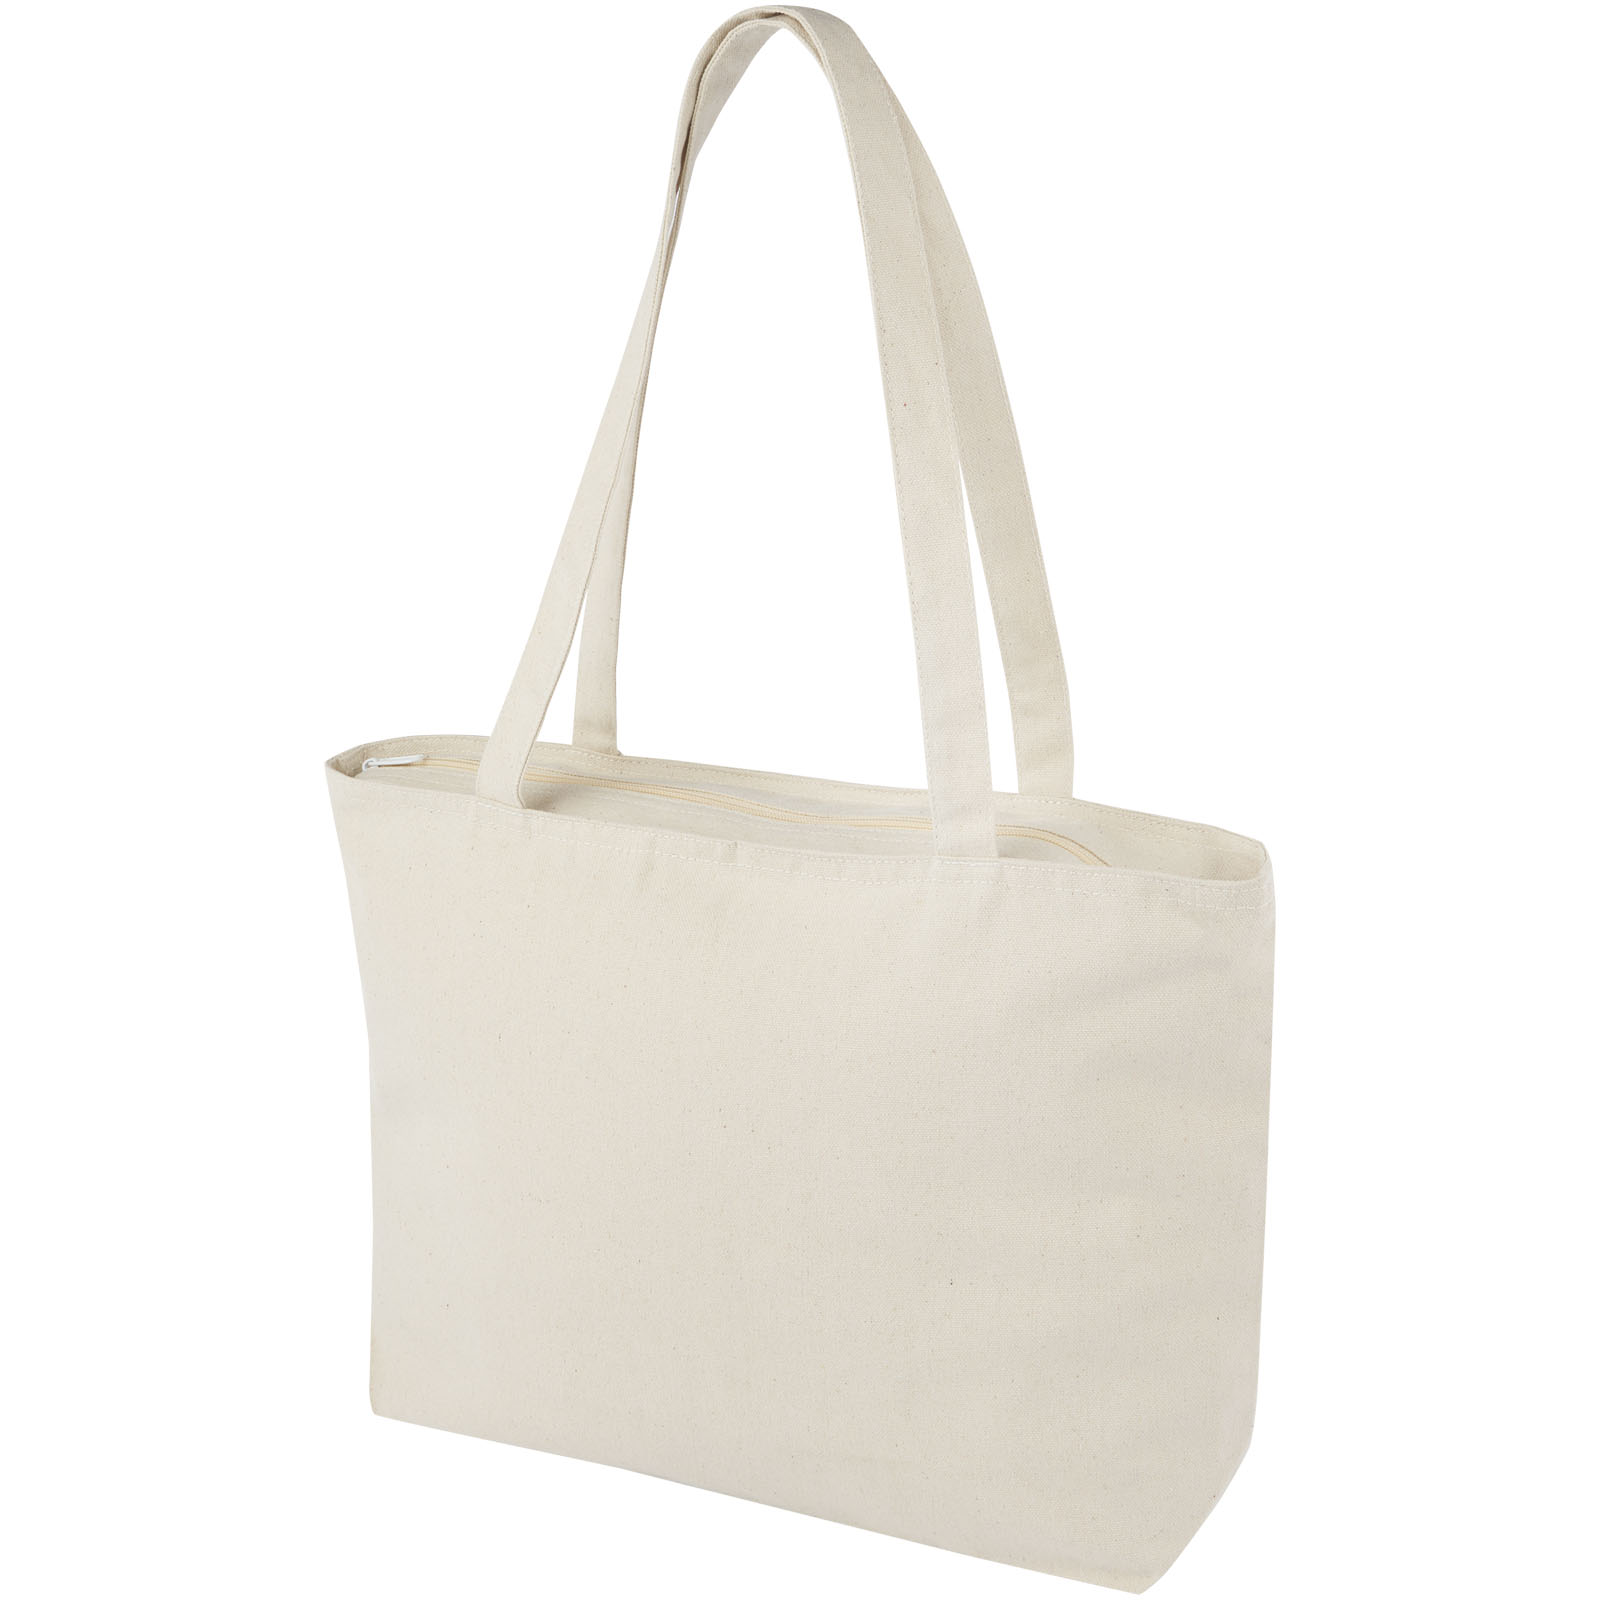 Advertising Cotton Bags - Ningbo 320 g/m² zippered cotton tote bag 15L - 0